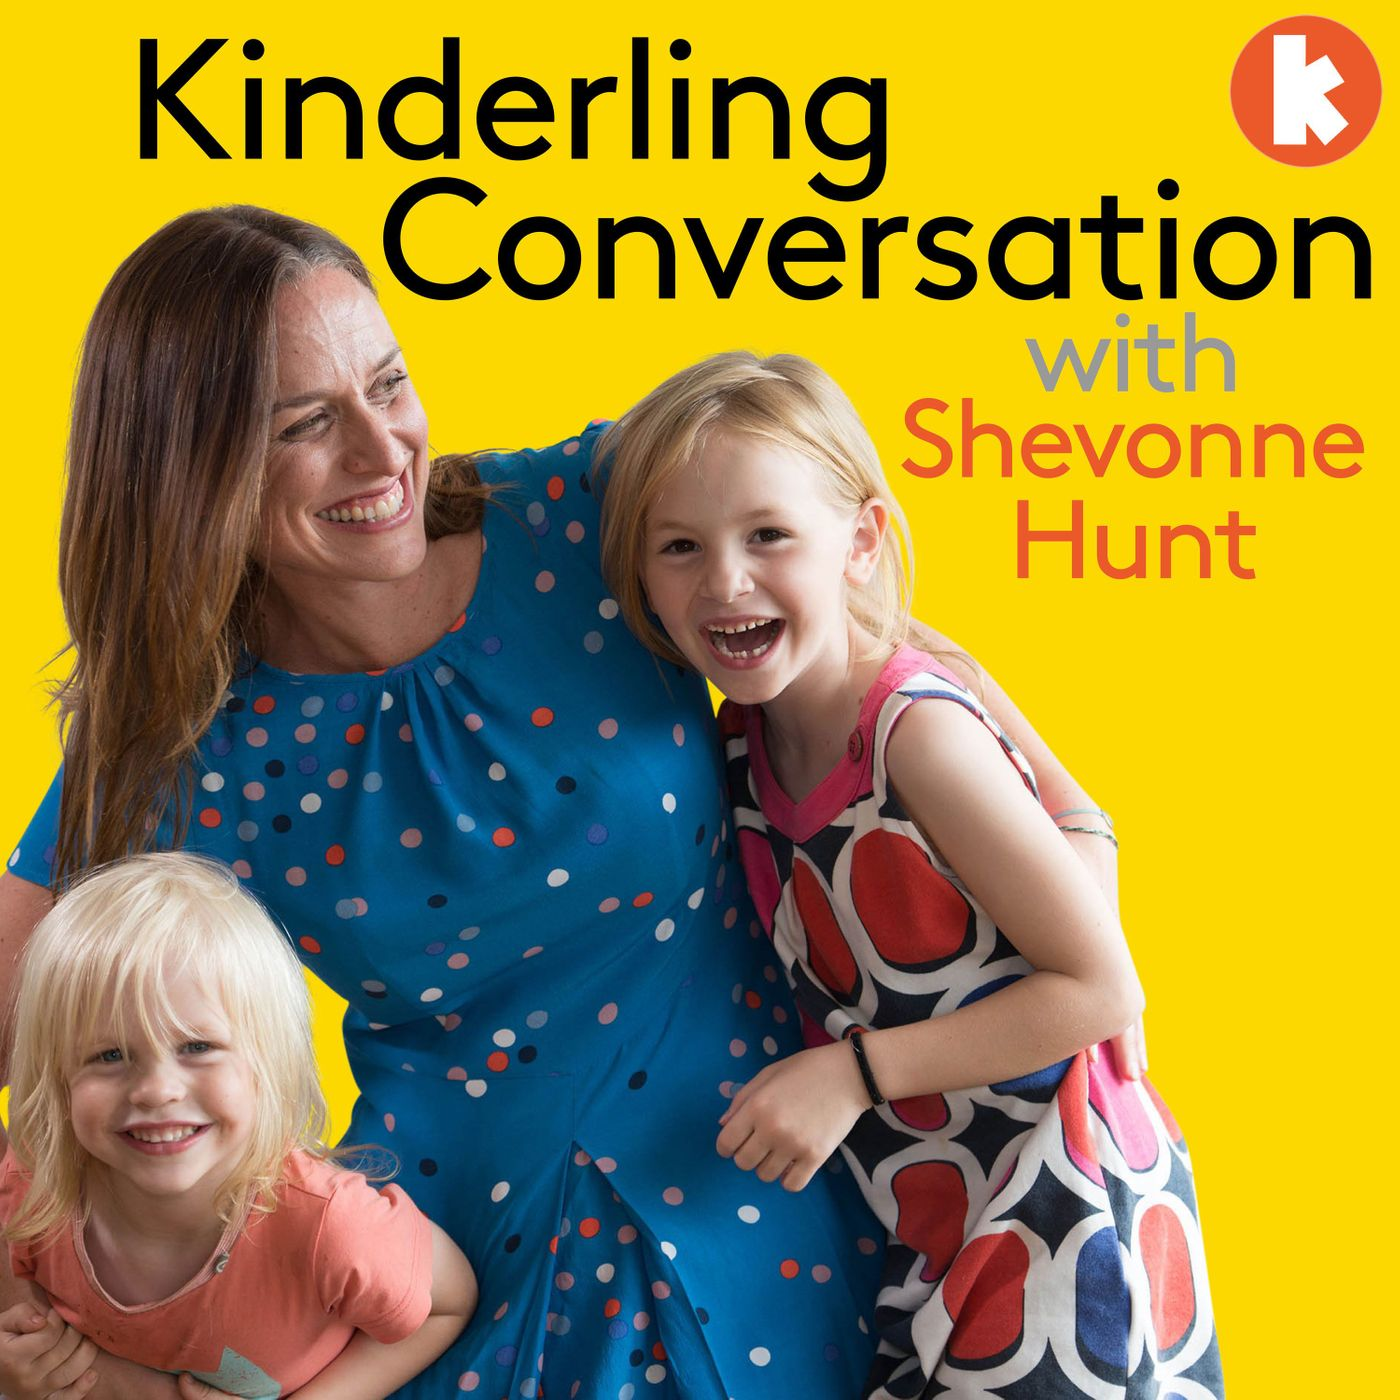 Kinderling Helpline: Troublesome Toddlers, Clingy Babies, Starting Daycare And More